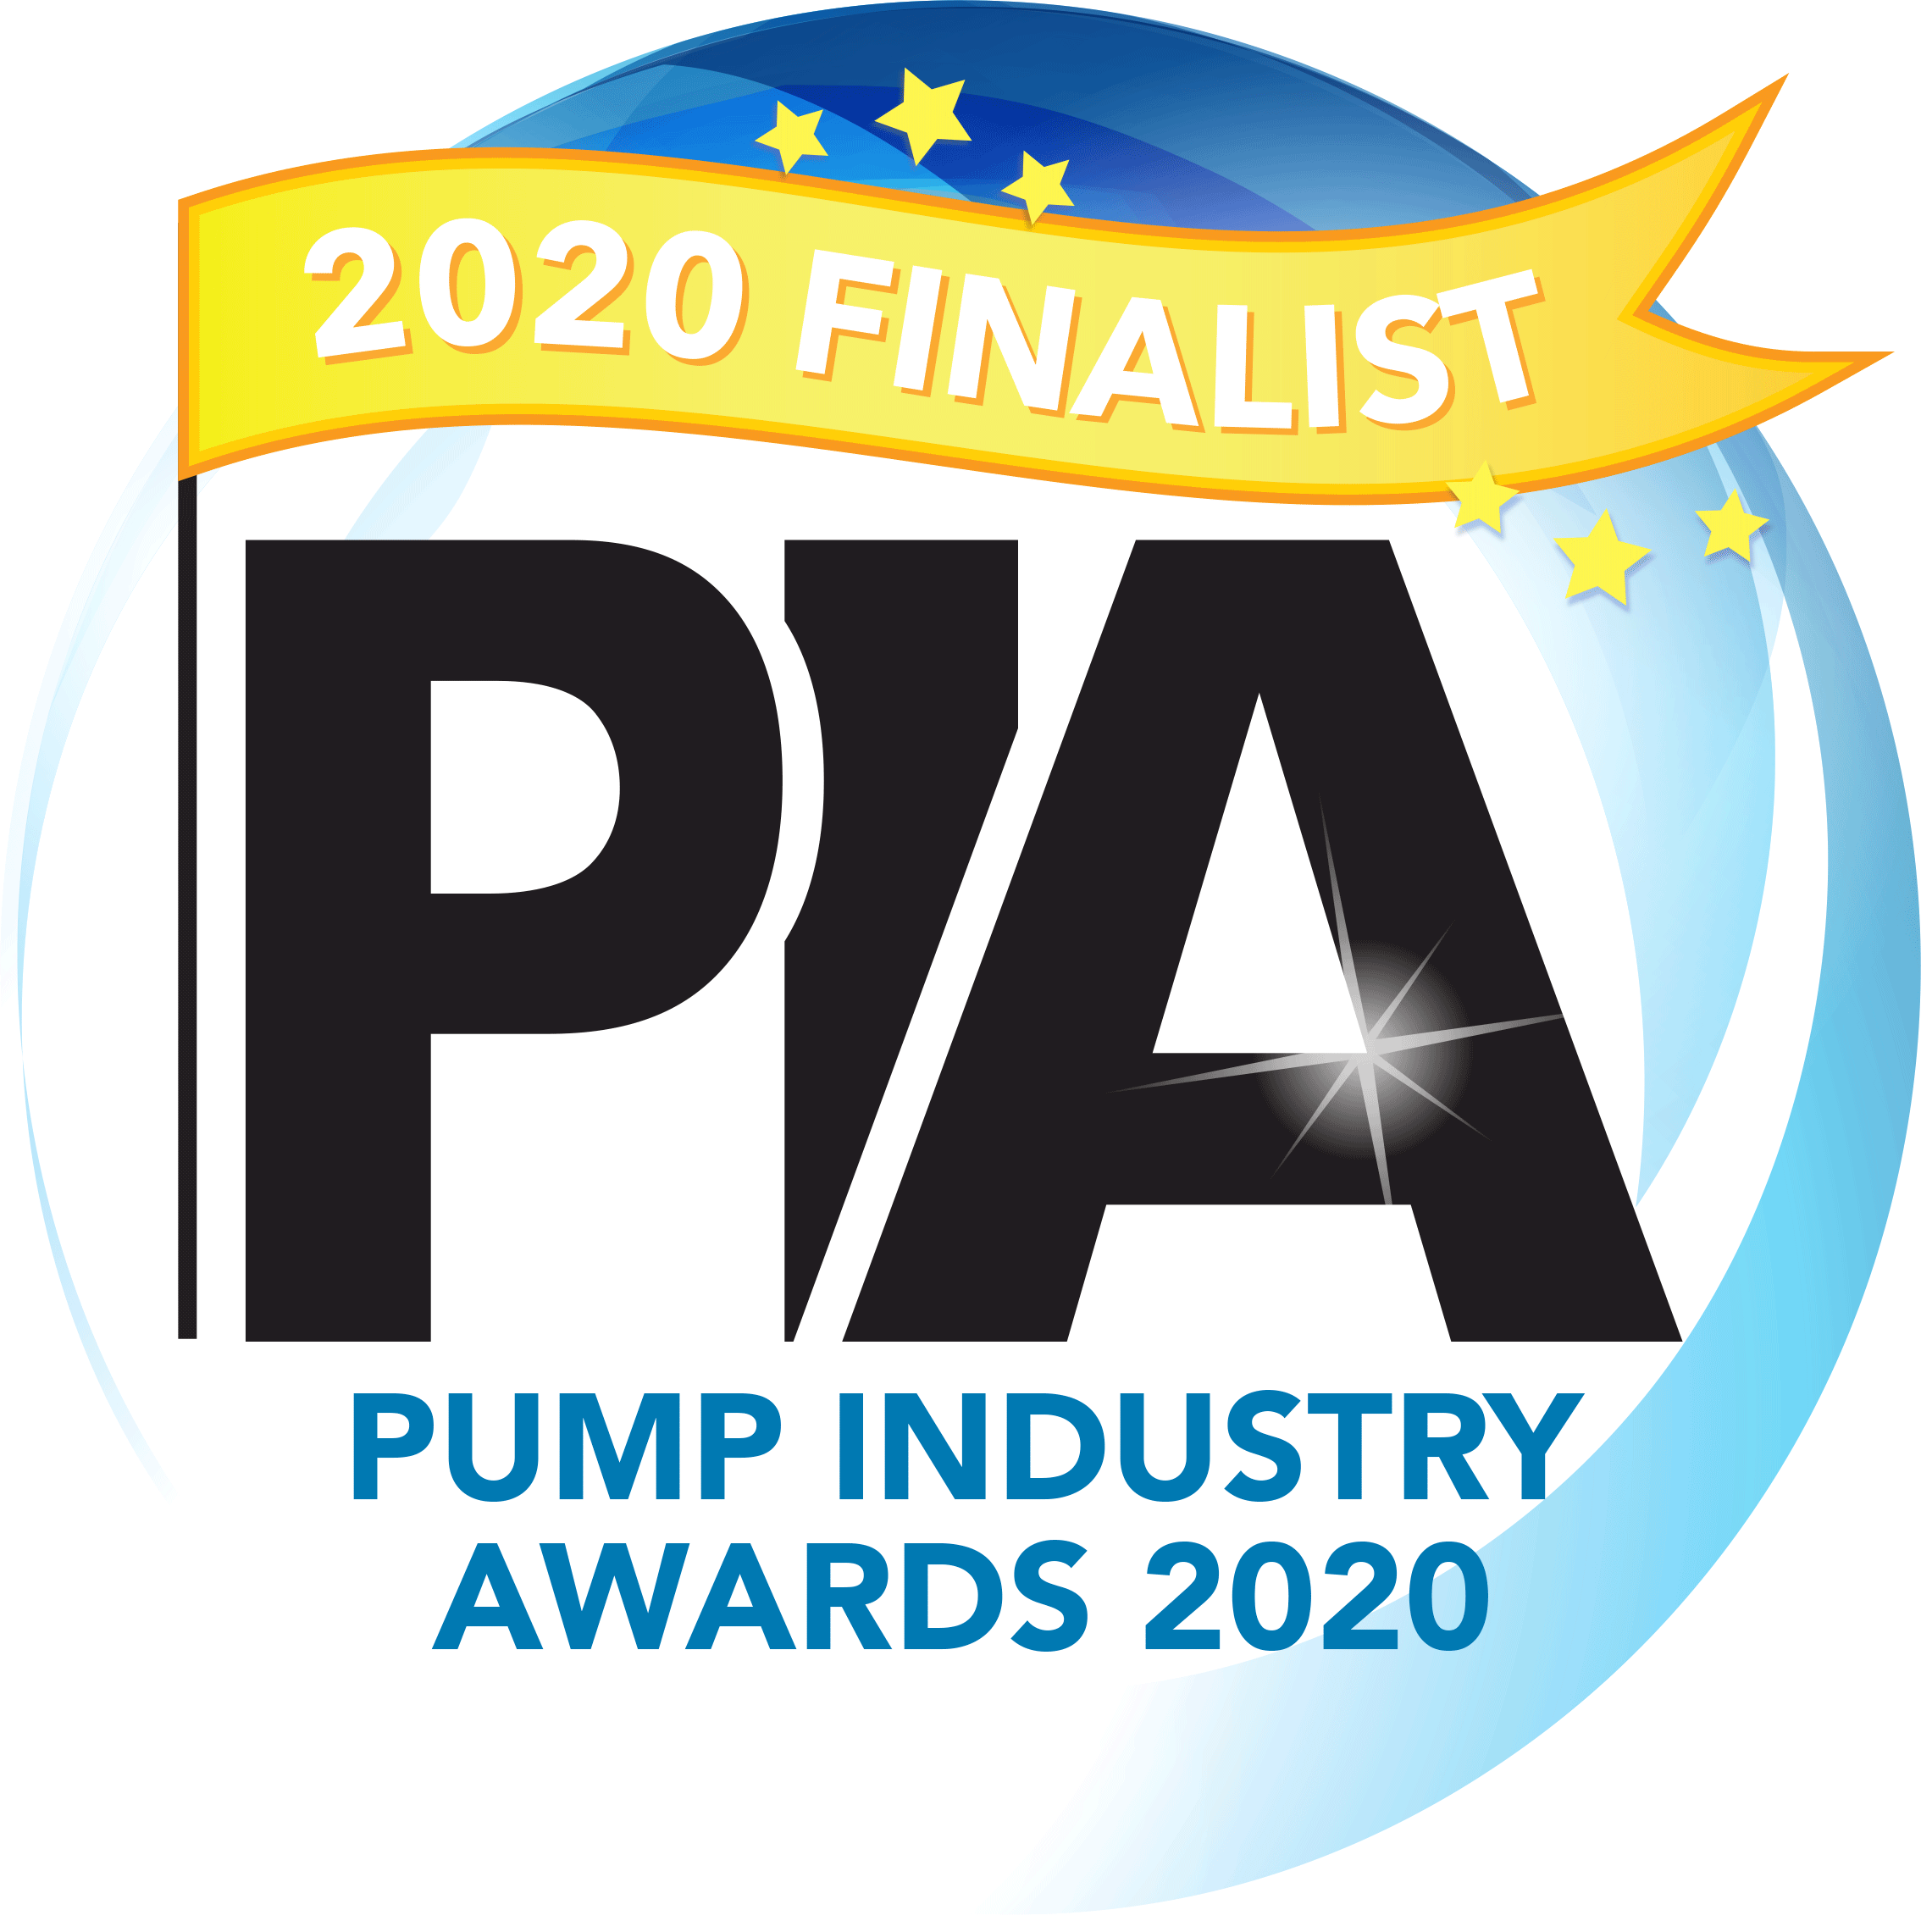 Now in its 20th year, the Pump Industry Awards celebrate outstanding achievements within the industry from individuals, companies and products.